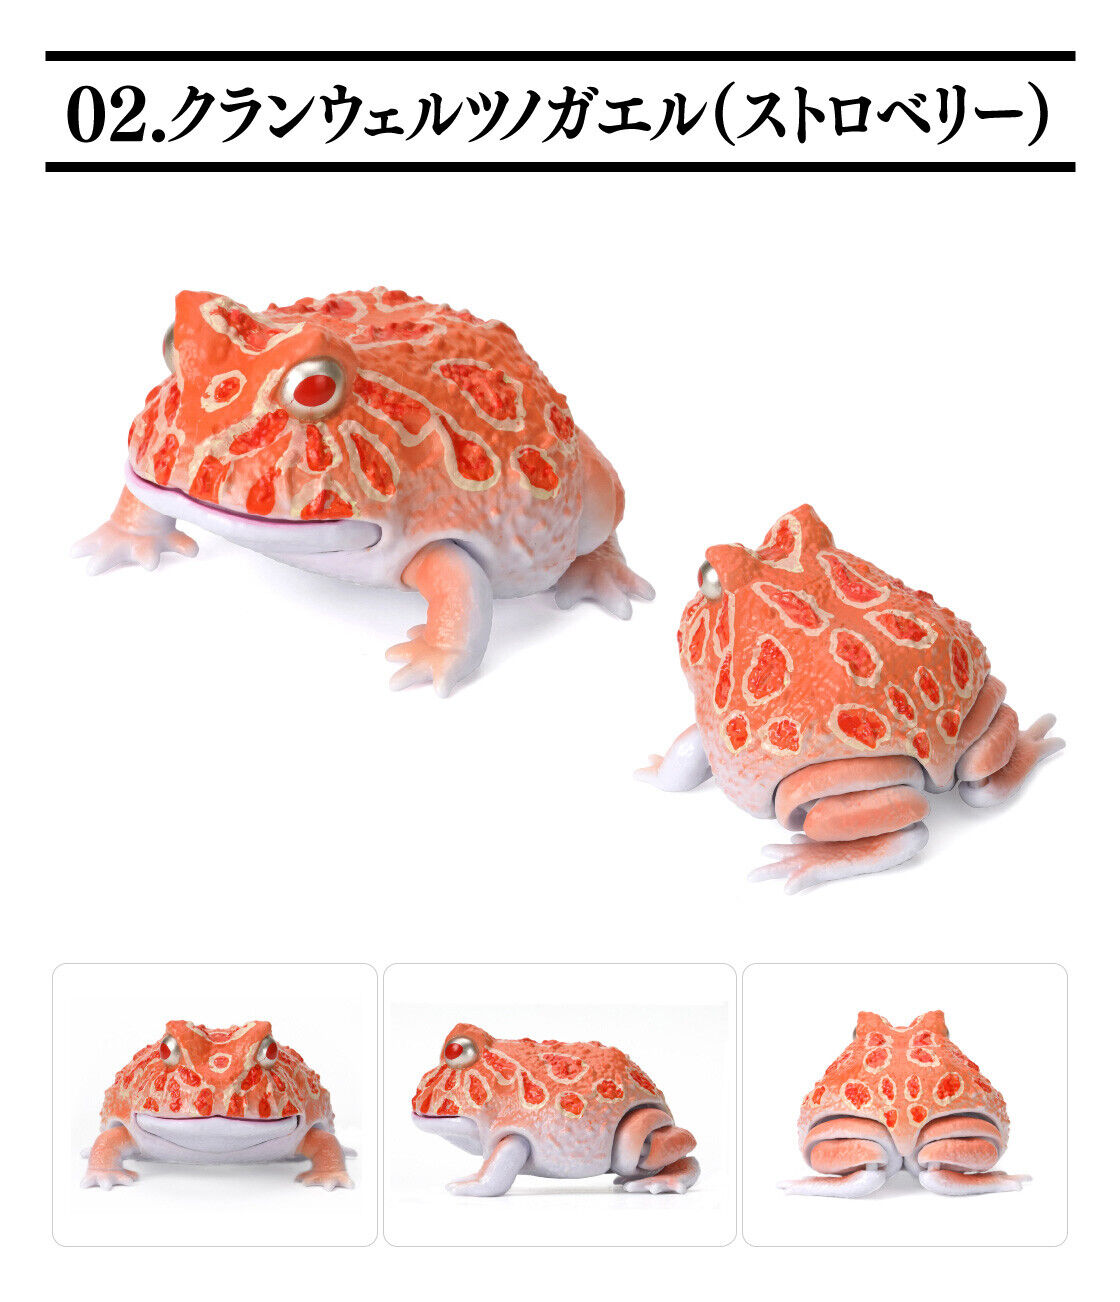 The Diversity of Life on Earth Bandai Gashapon Cranwell Horned Frog Strawberry